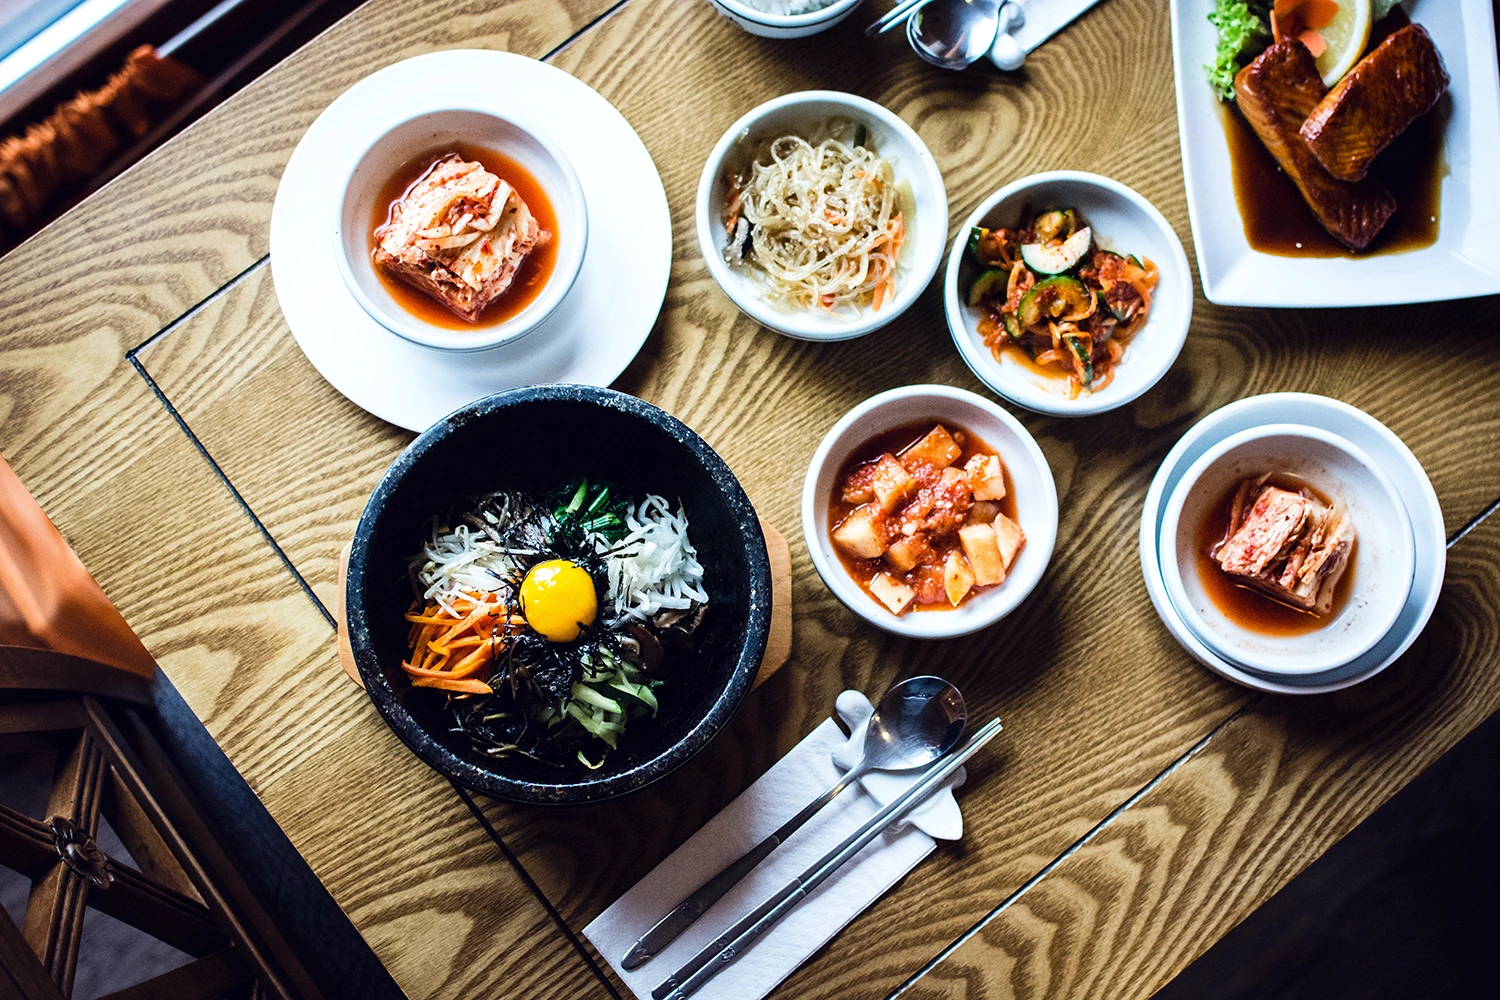 Plates and bowls filled with Korean food on a wooden table.